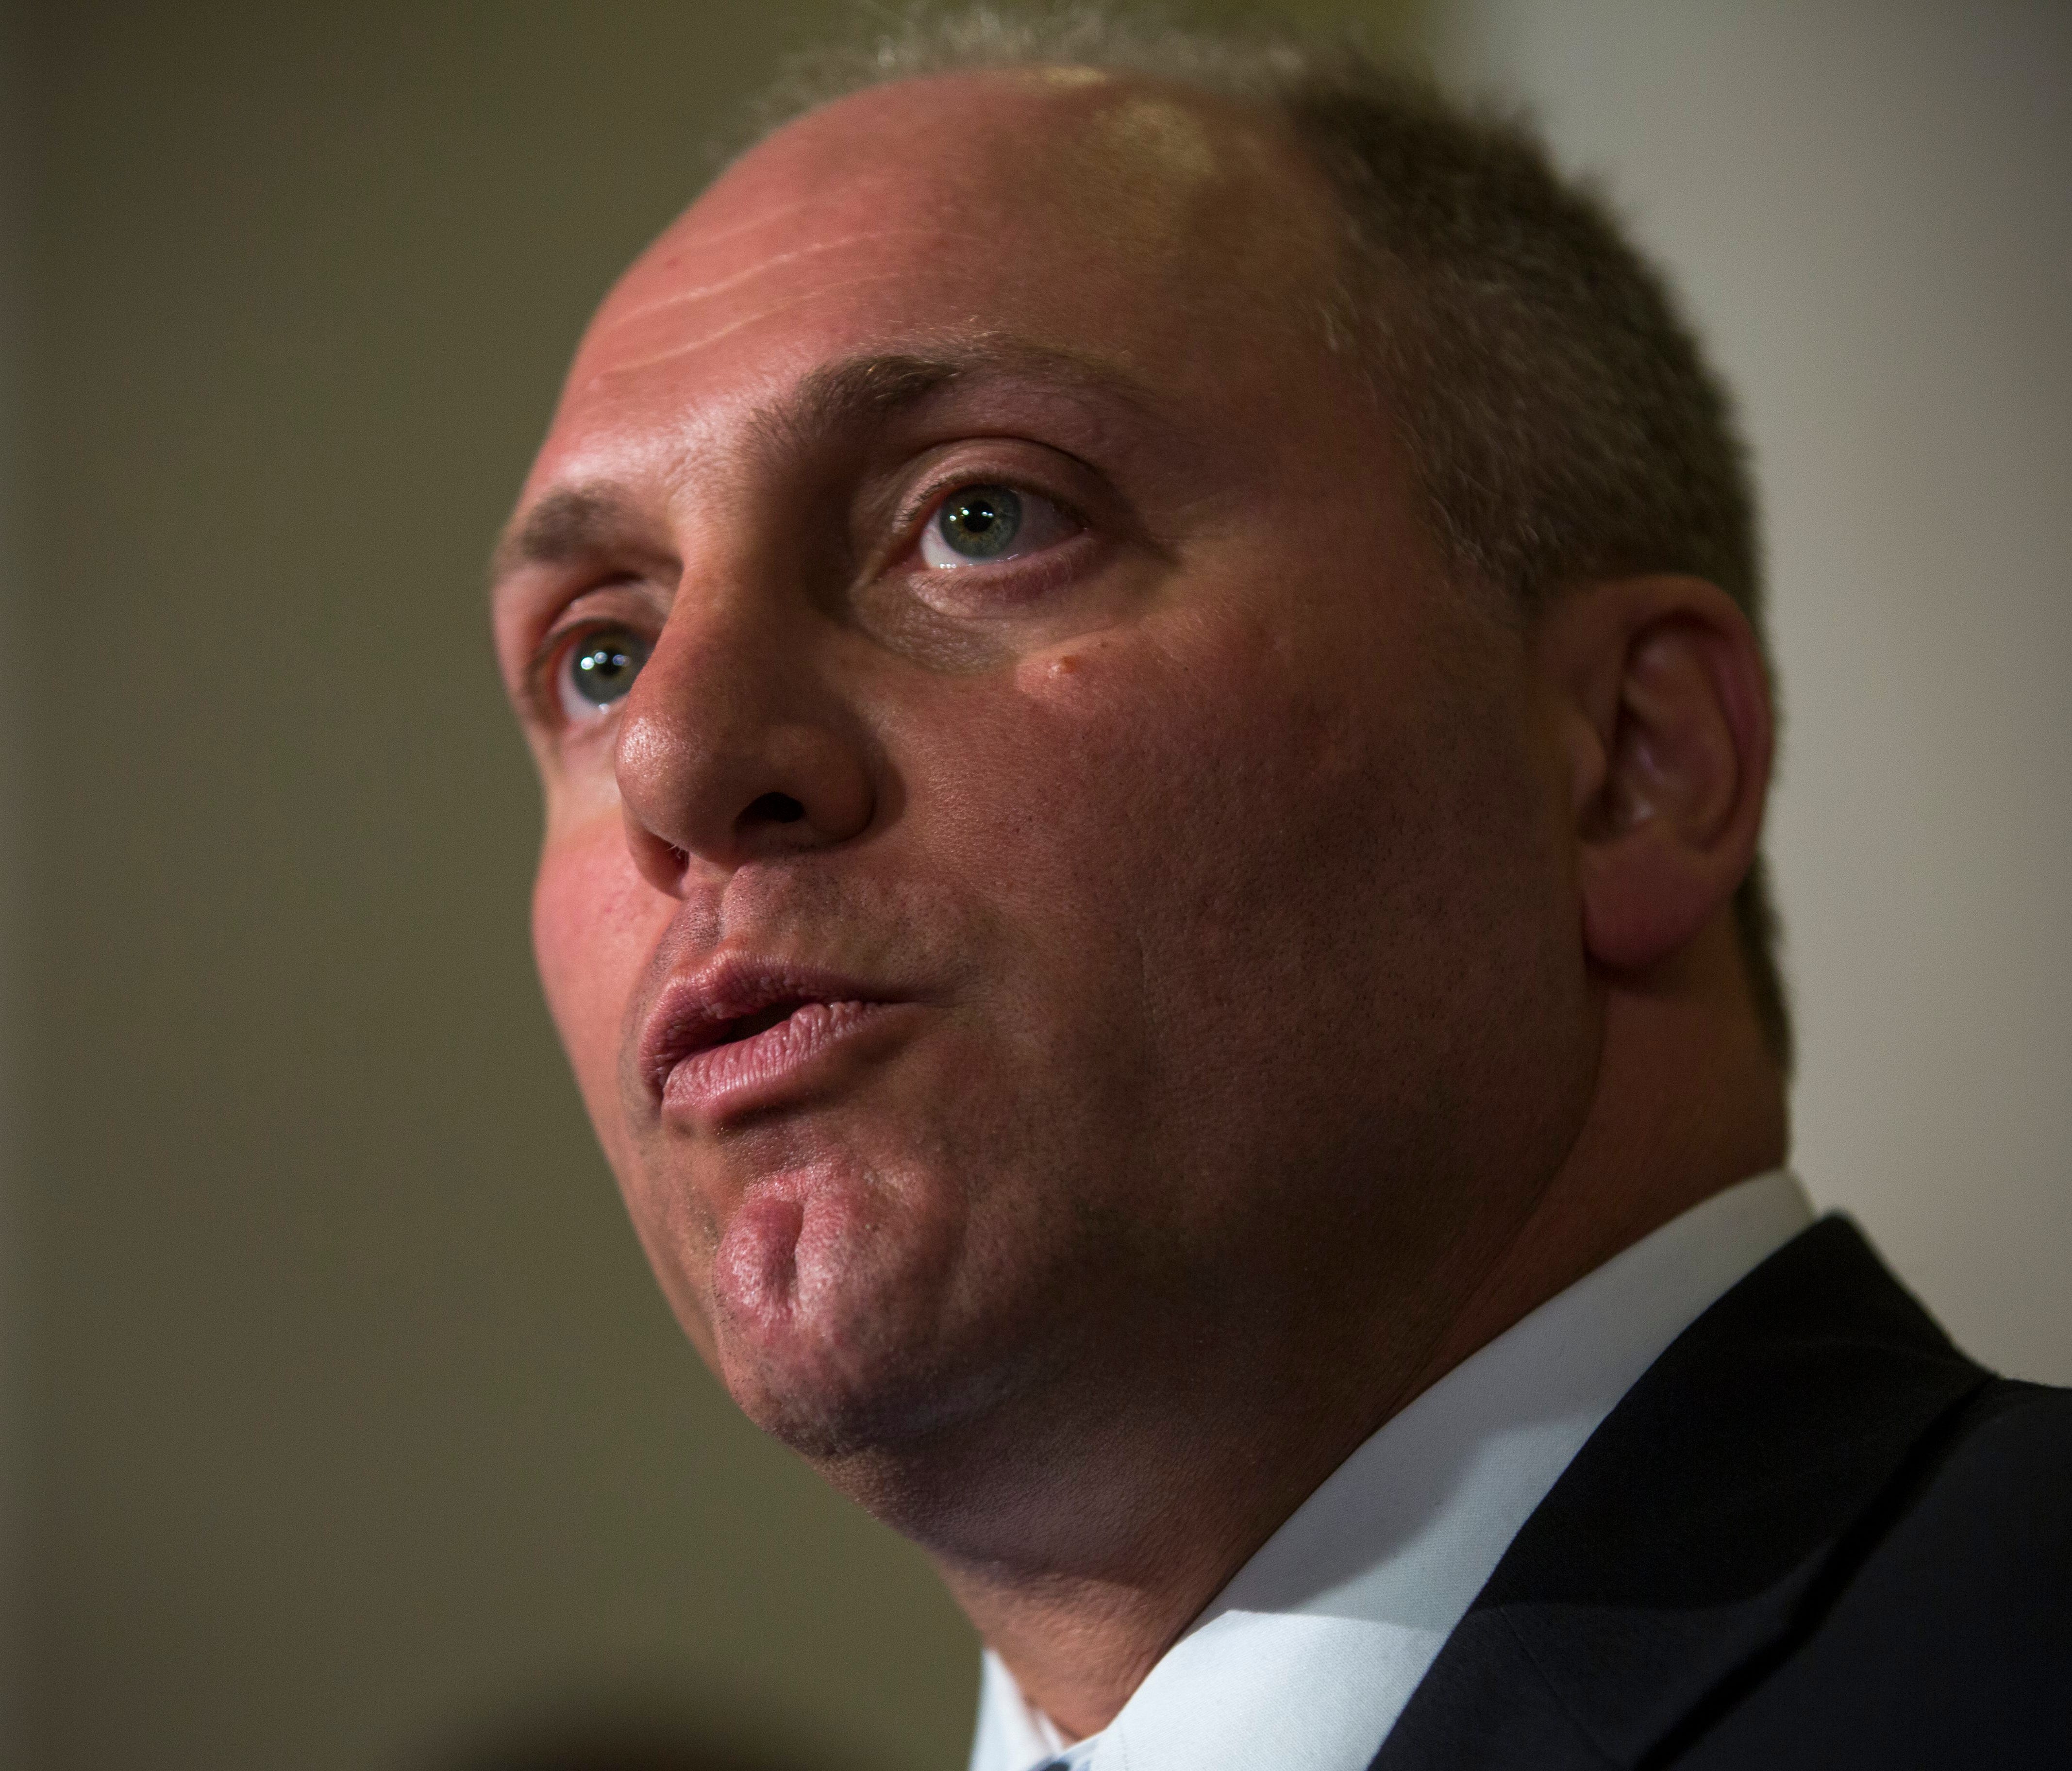 Republican congressman Steve Scalise from Louisiana is pictured speaking after House members elected him as the new House majority whip in the Longworth Building in Washington D.C.